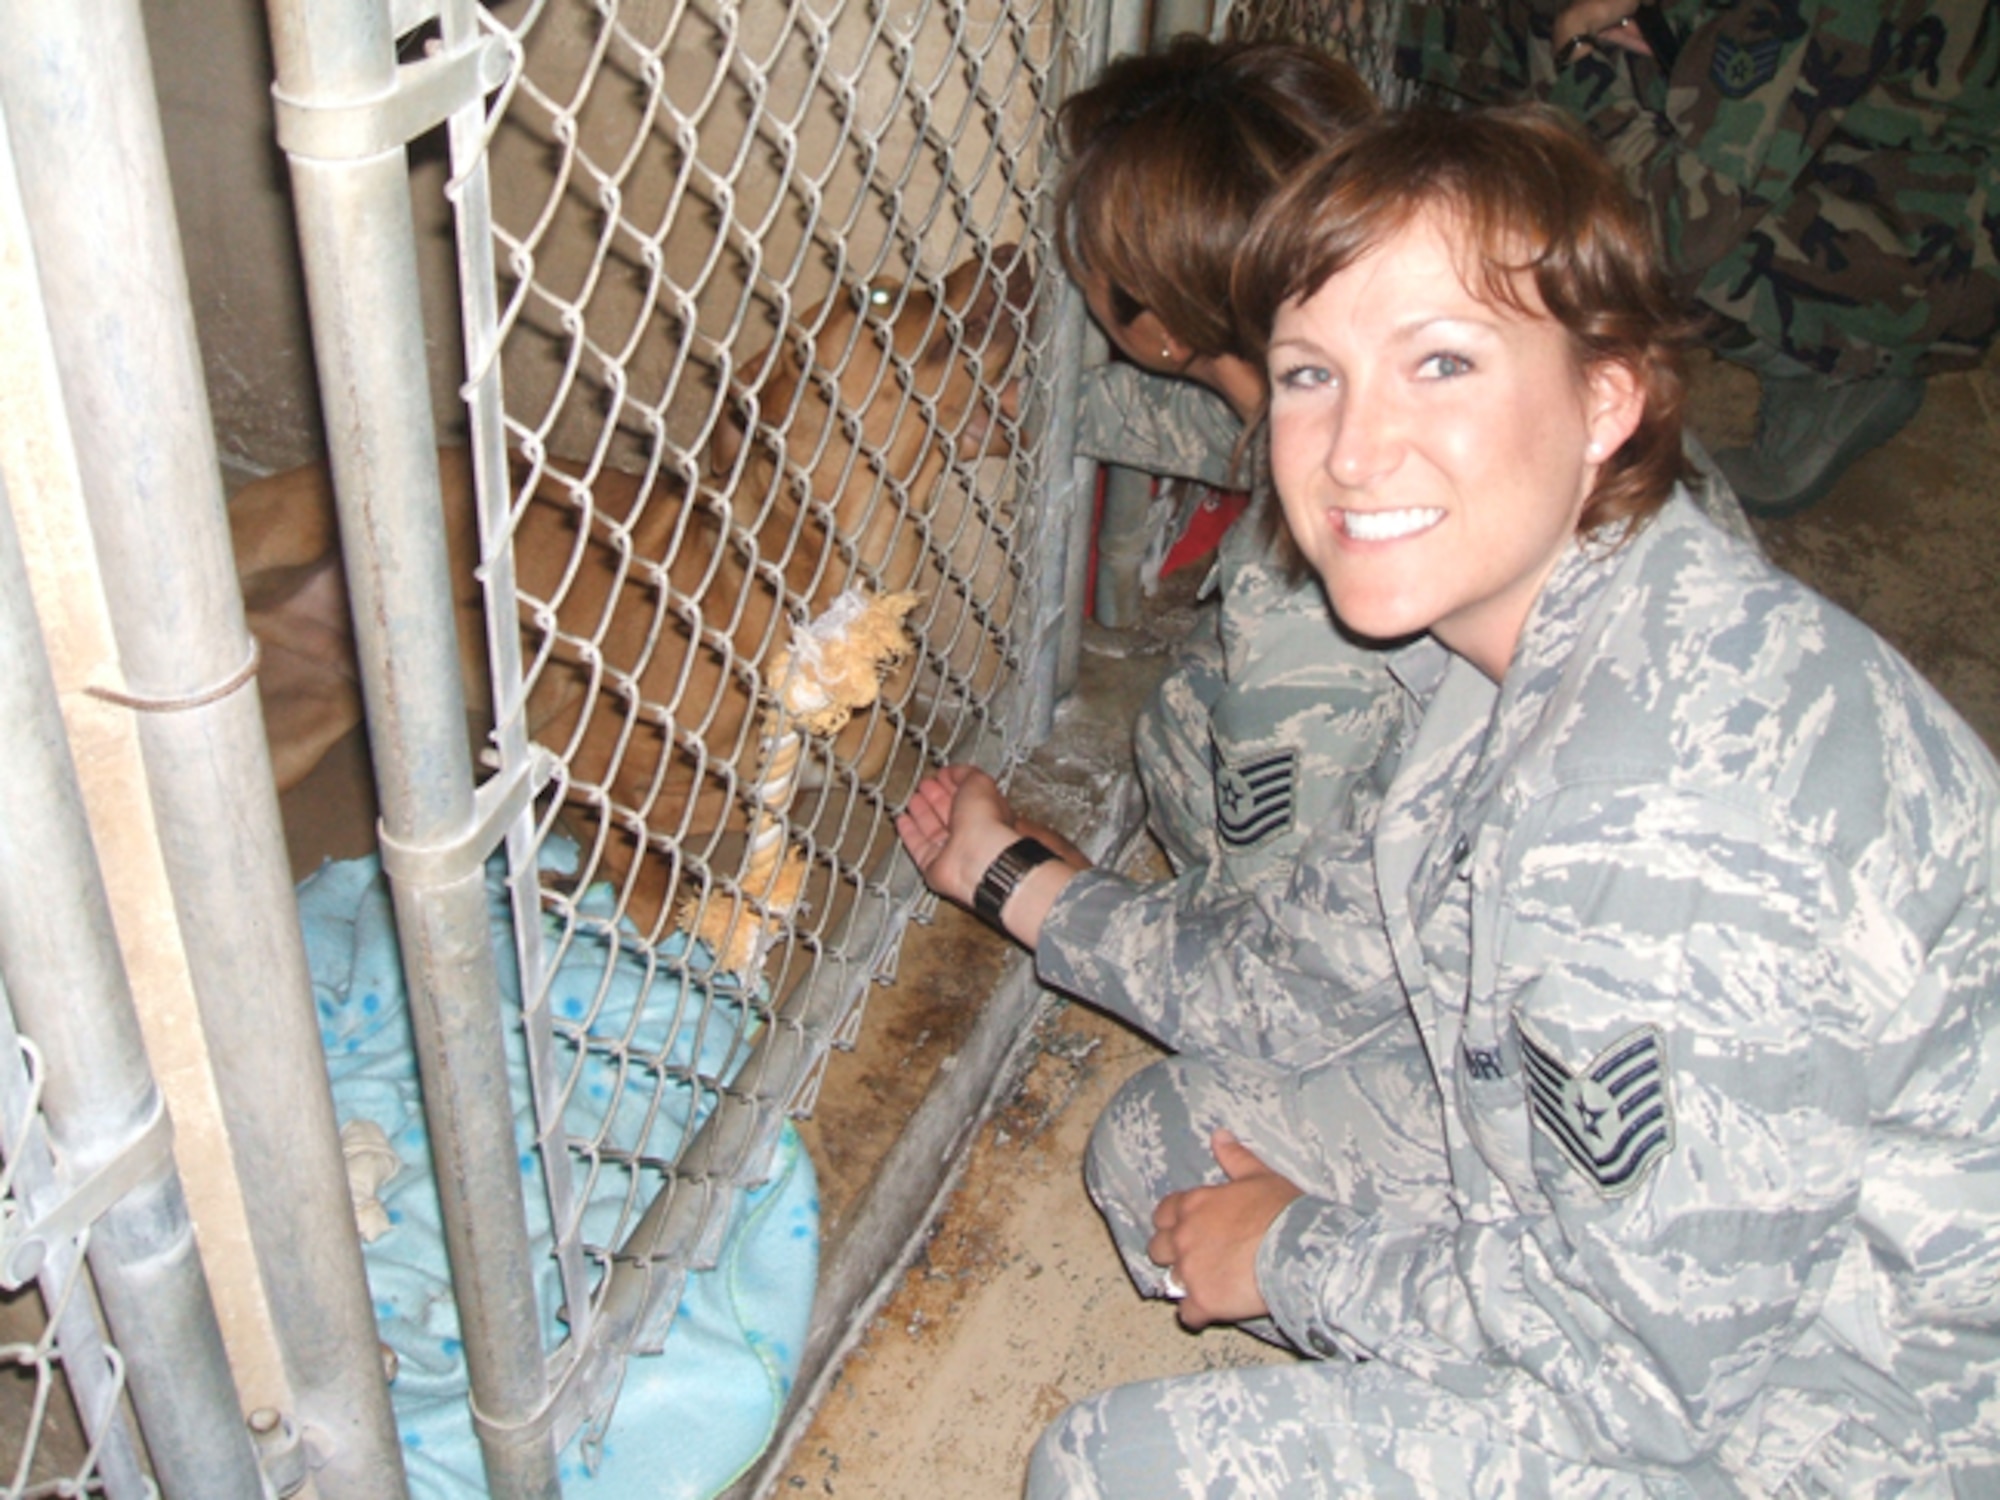 Tech. Sgt. Sandra Deason (facing camera) and Tech. Sgt. Sara Montes visit with one of the animals at the Universal City Animal Shelter after delivering supplies donated by members of the Air Force Personnel Center. (U.S. Air Force photo/File)